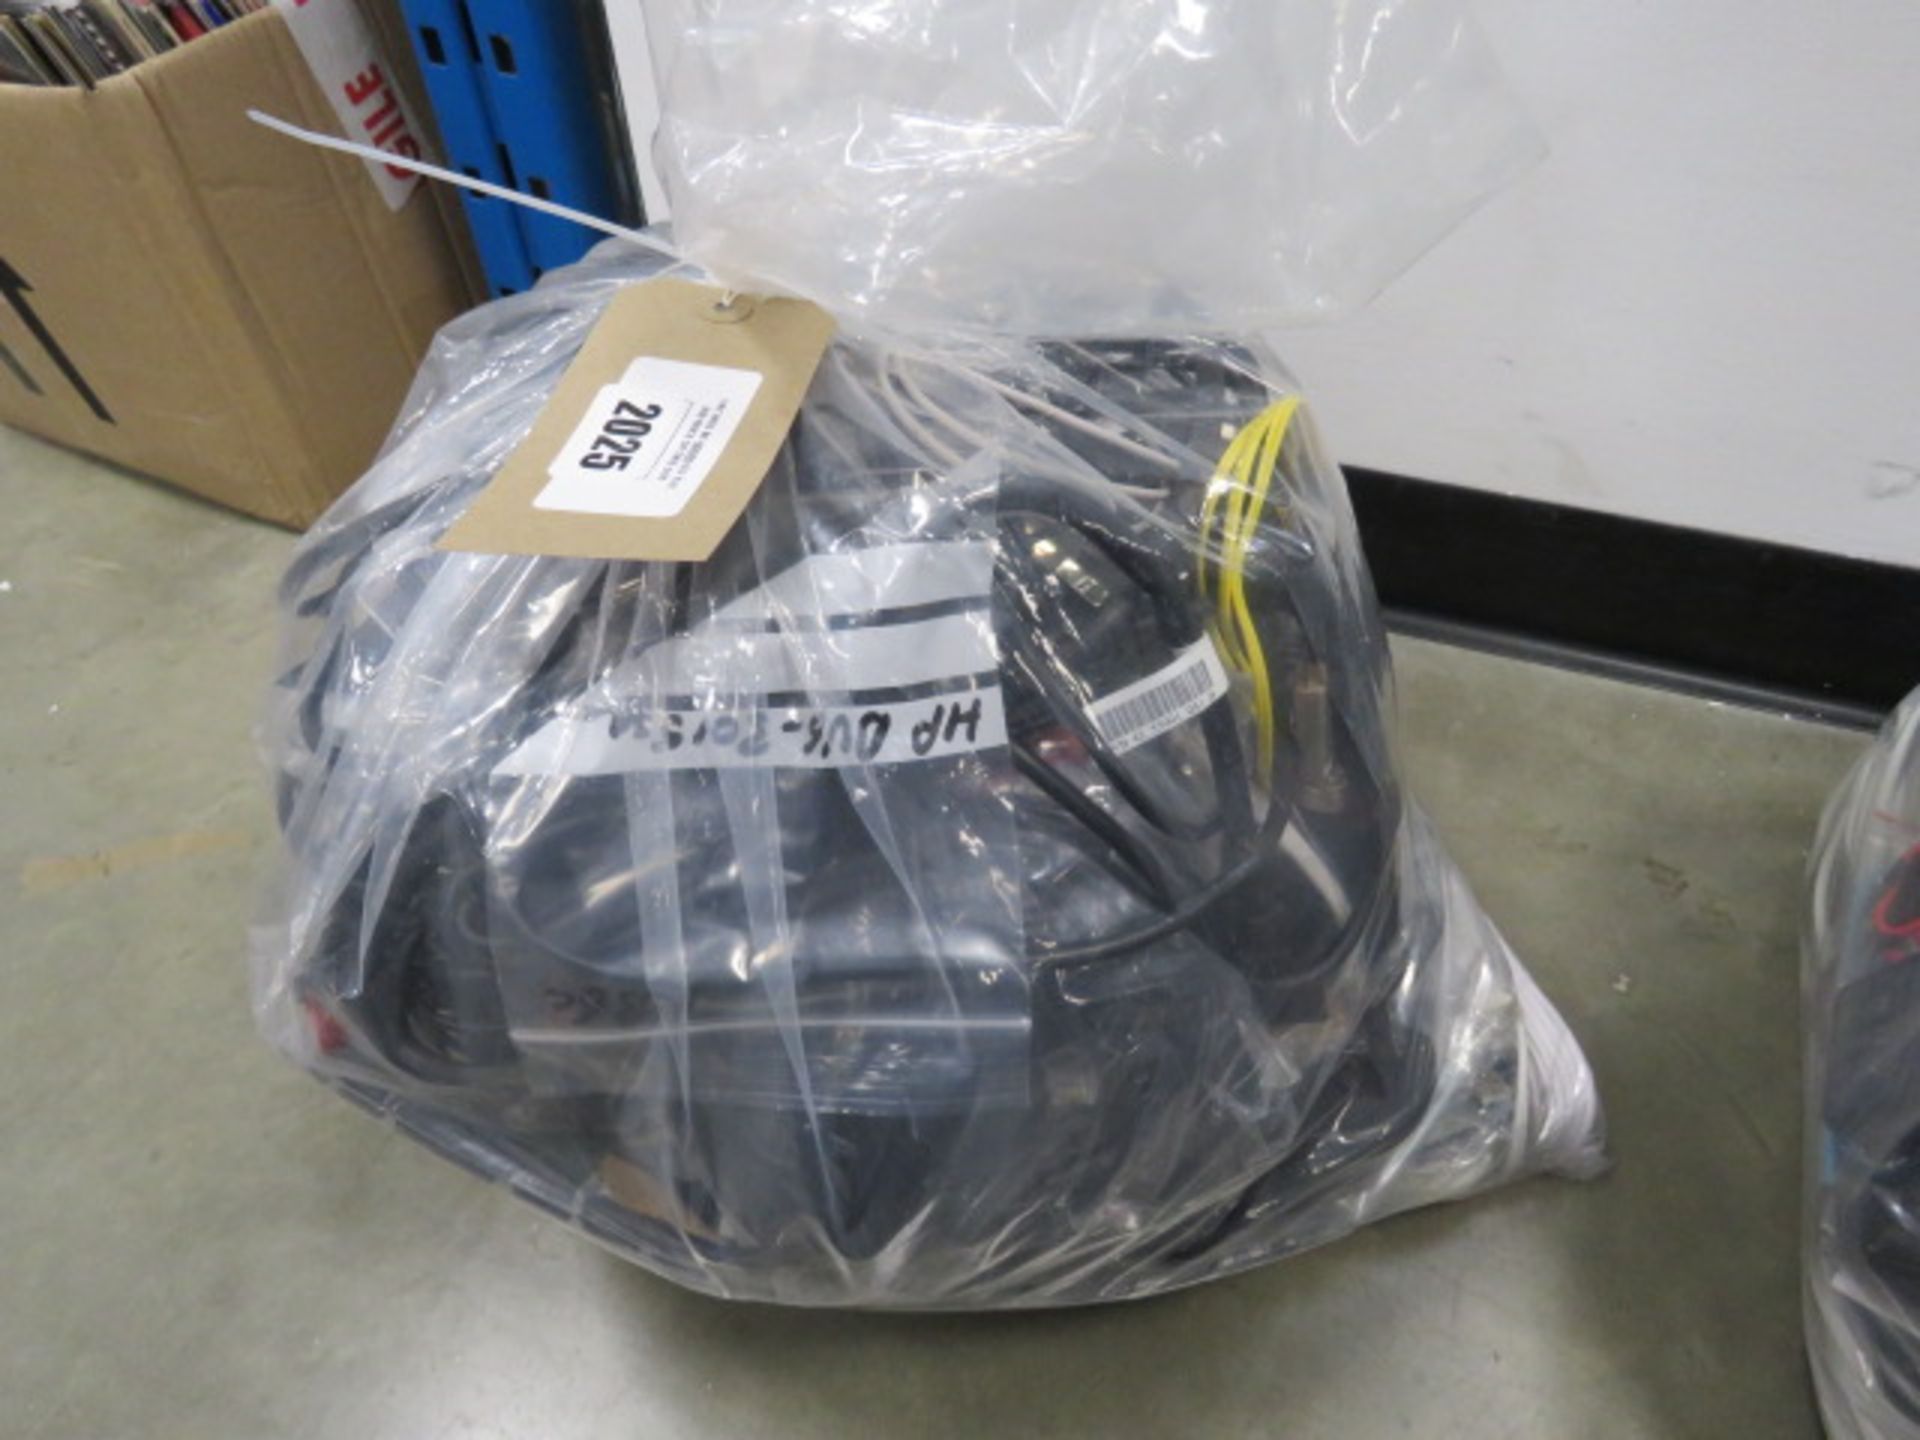 Bag of loose electrical components, cabling and power supplies